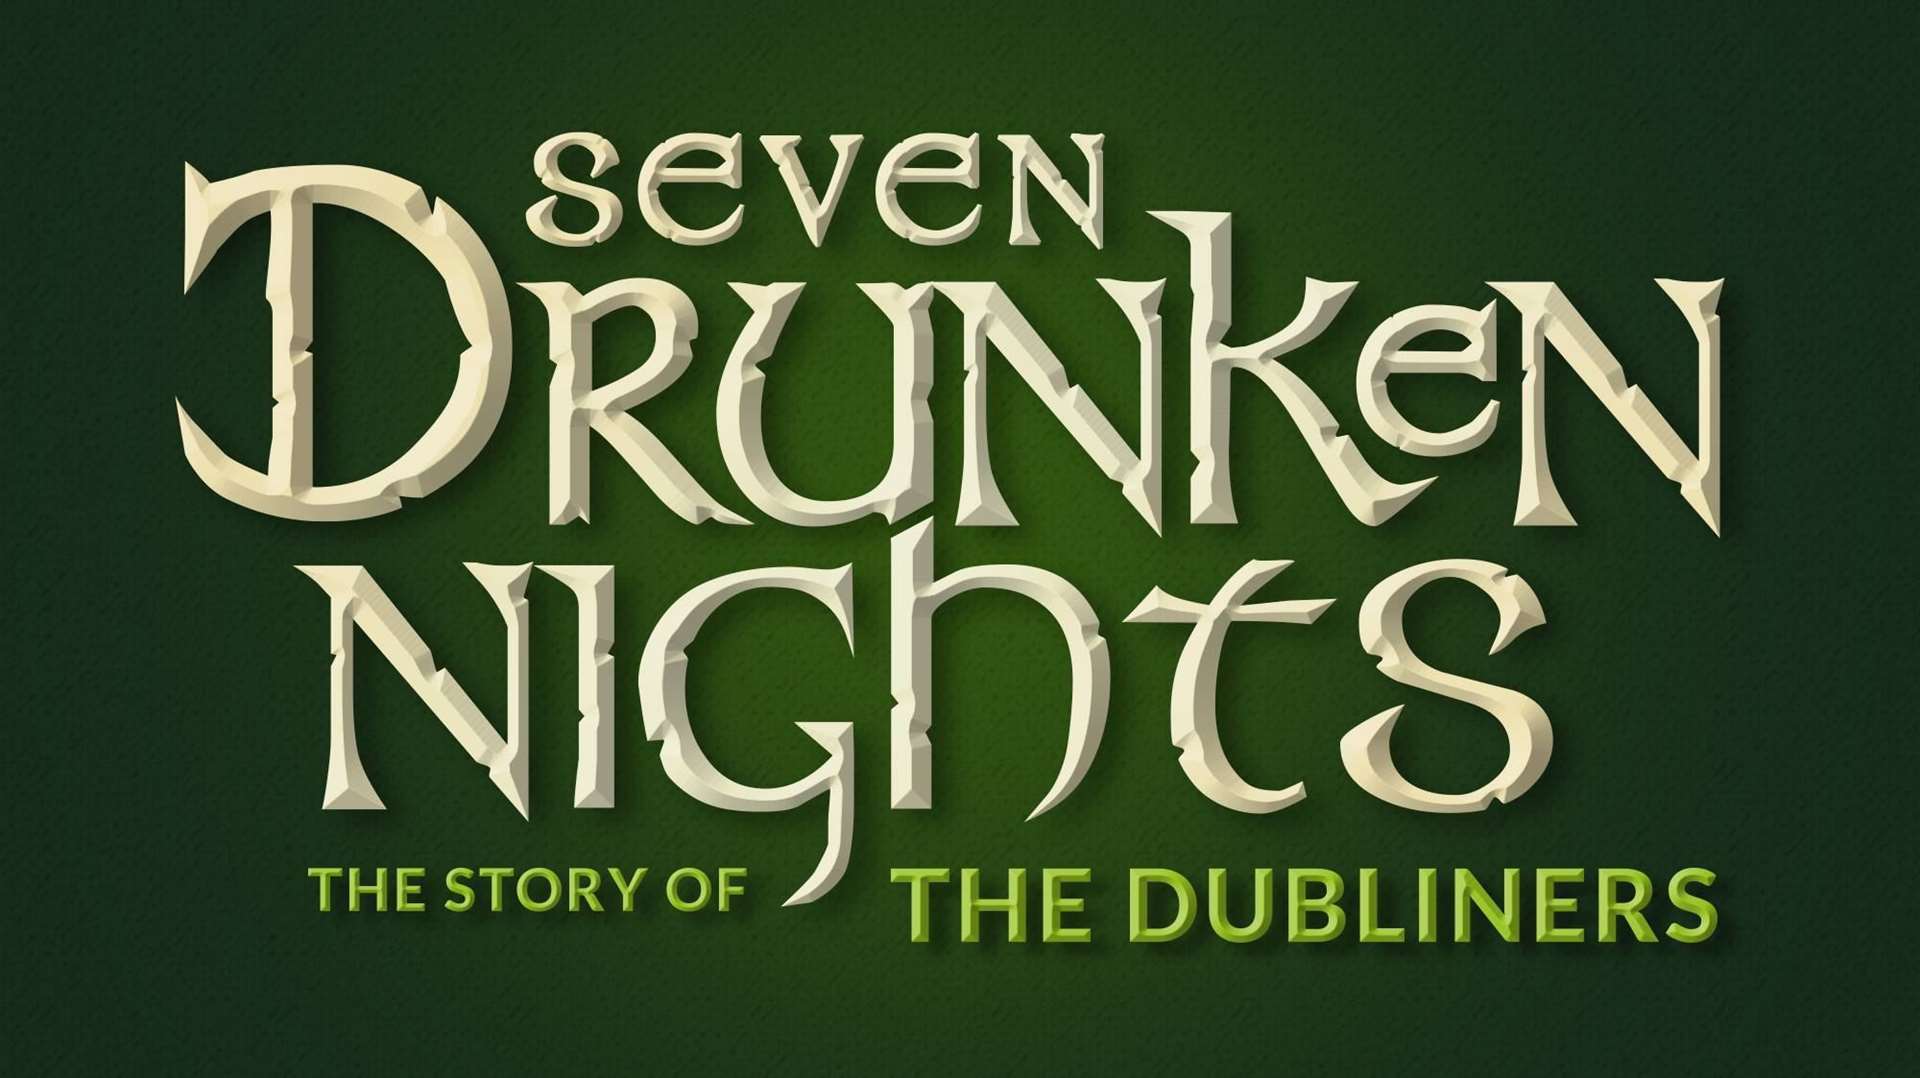 Seven Drunken Nights pays tributes to the music and career of The Dubliners.